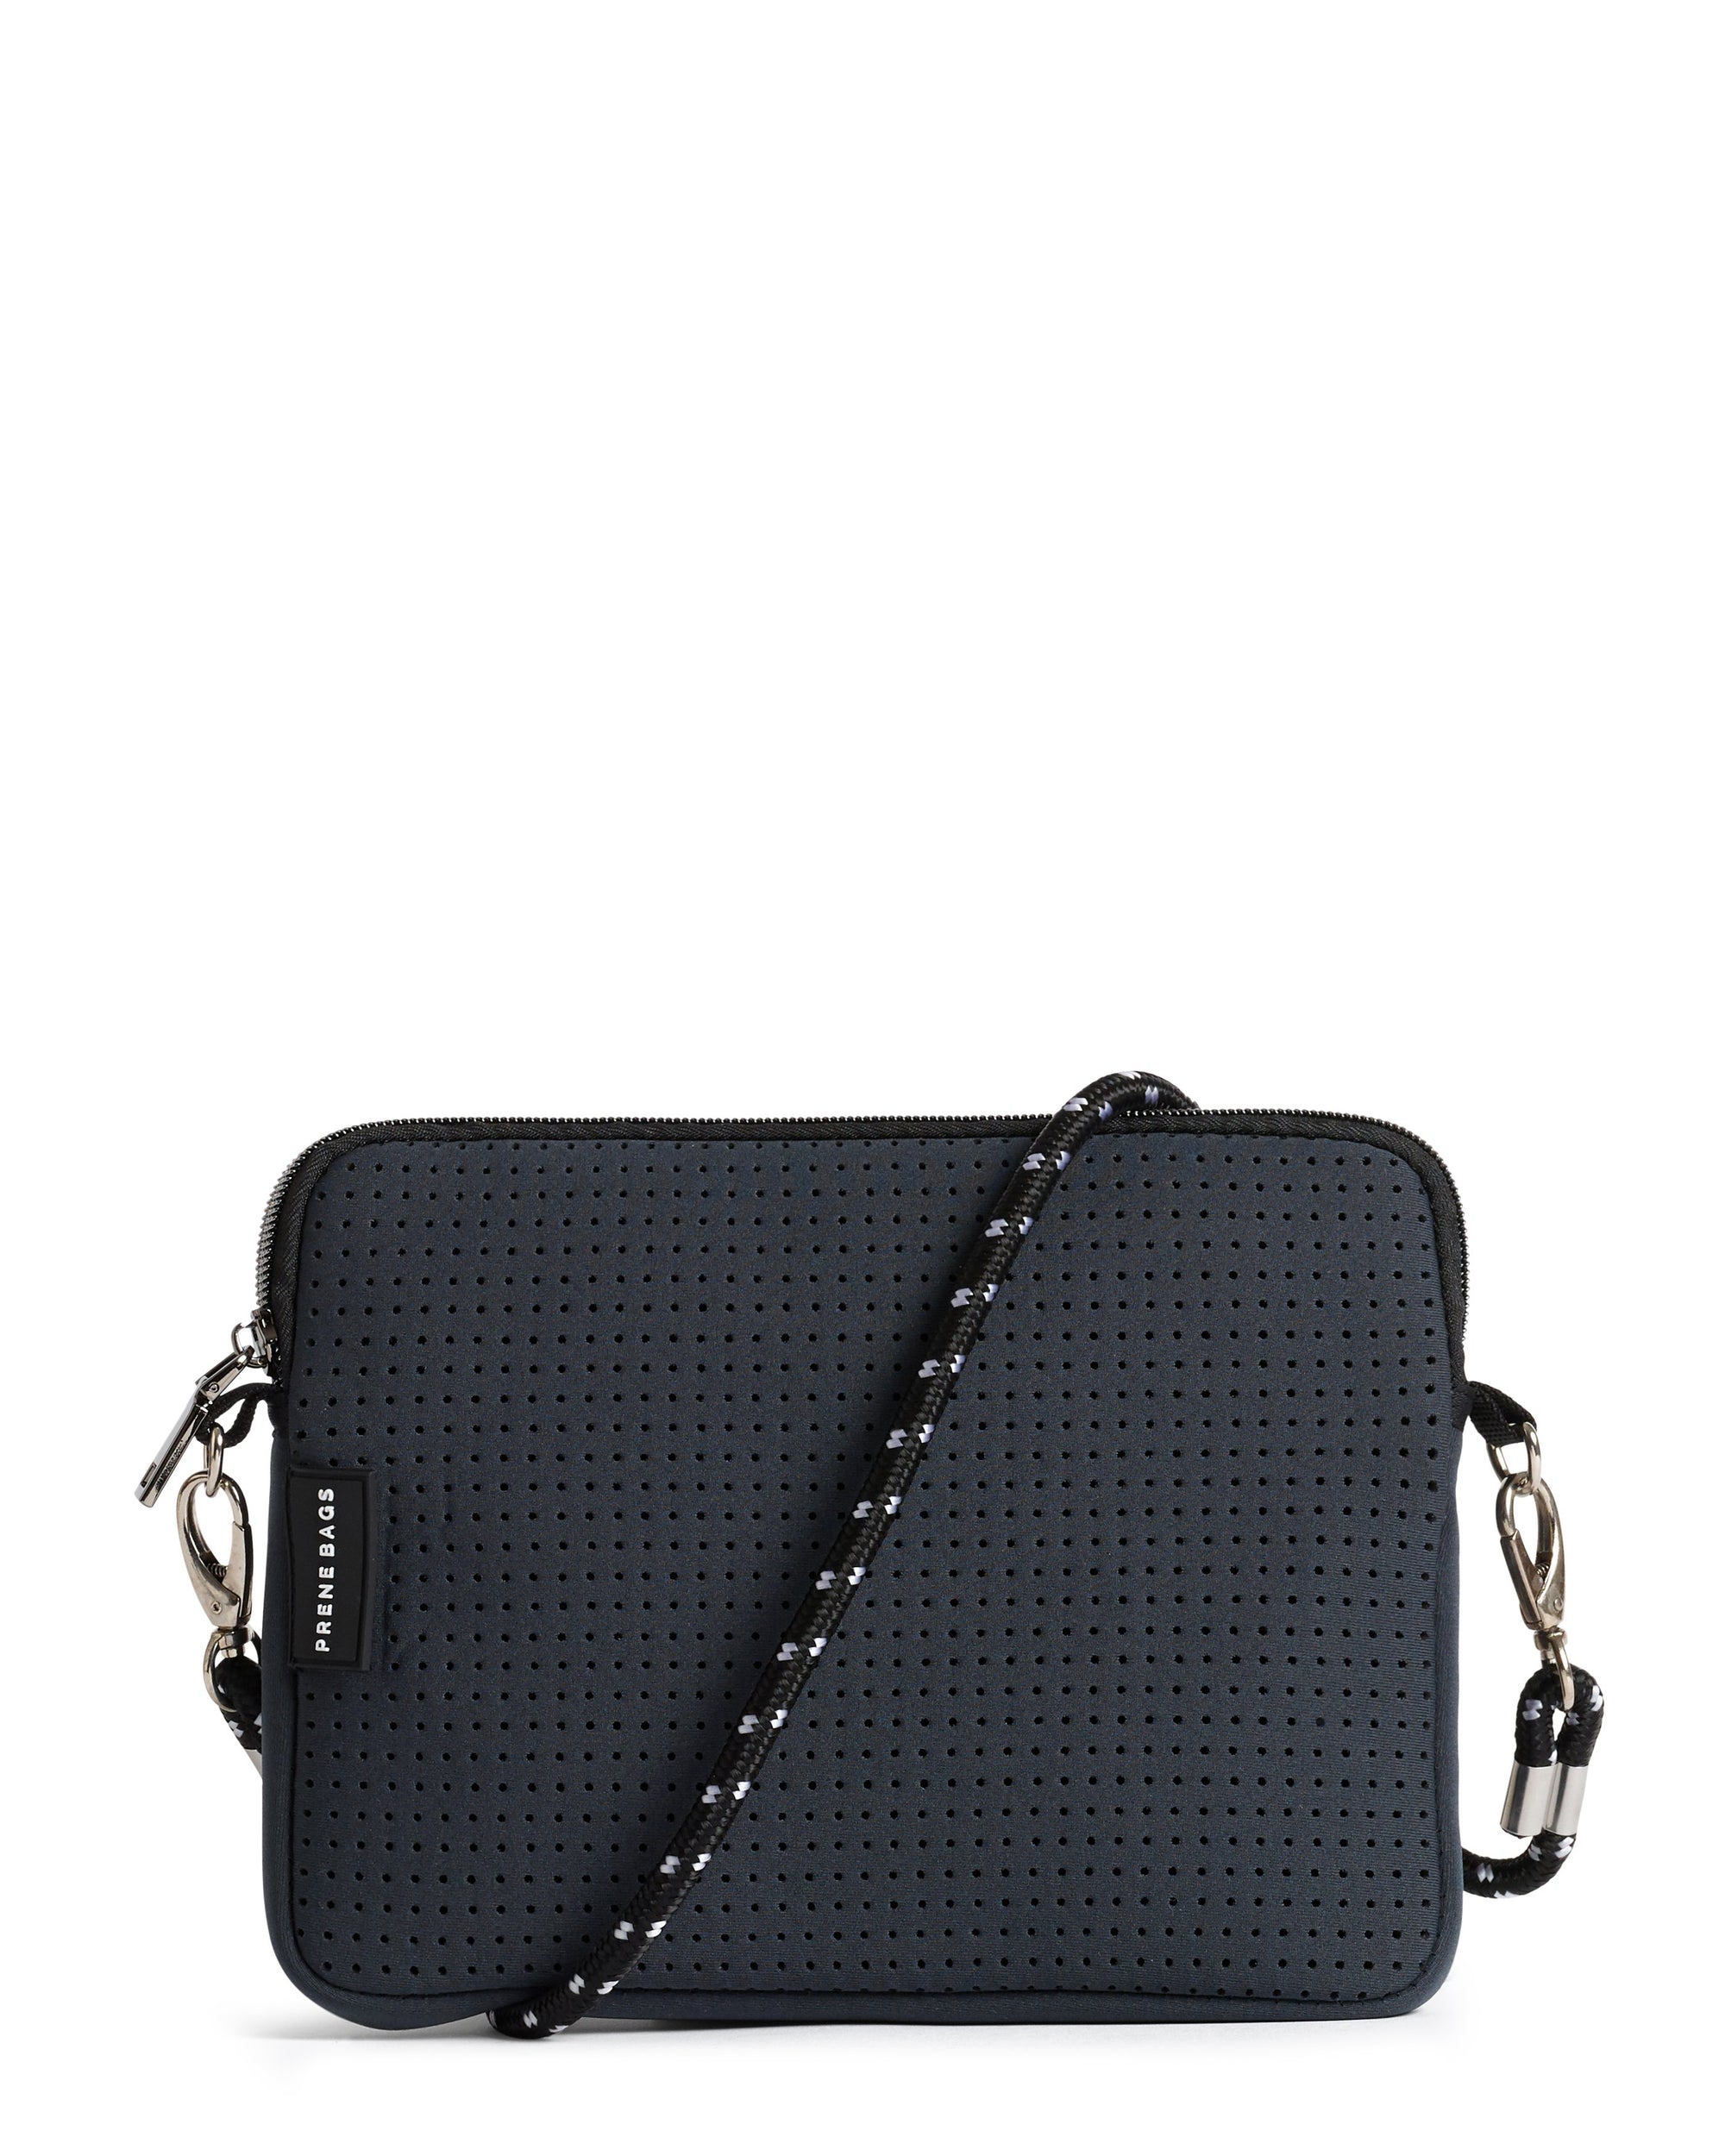 Prene Bags - The Sterling Bag (METALLIC SILVER) Perforated